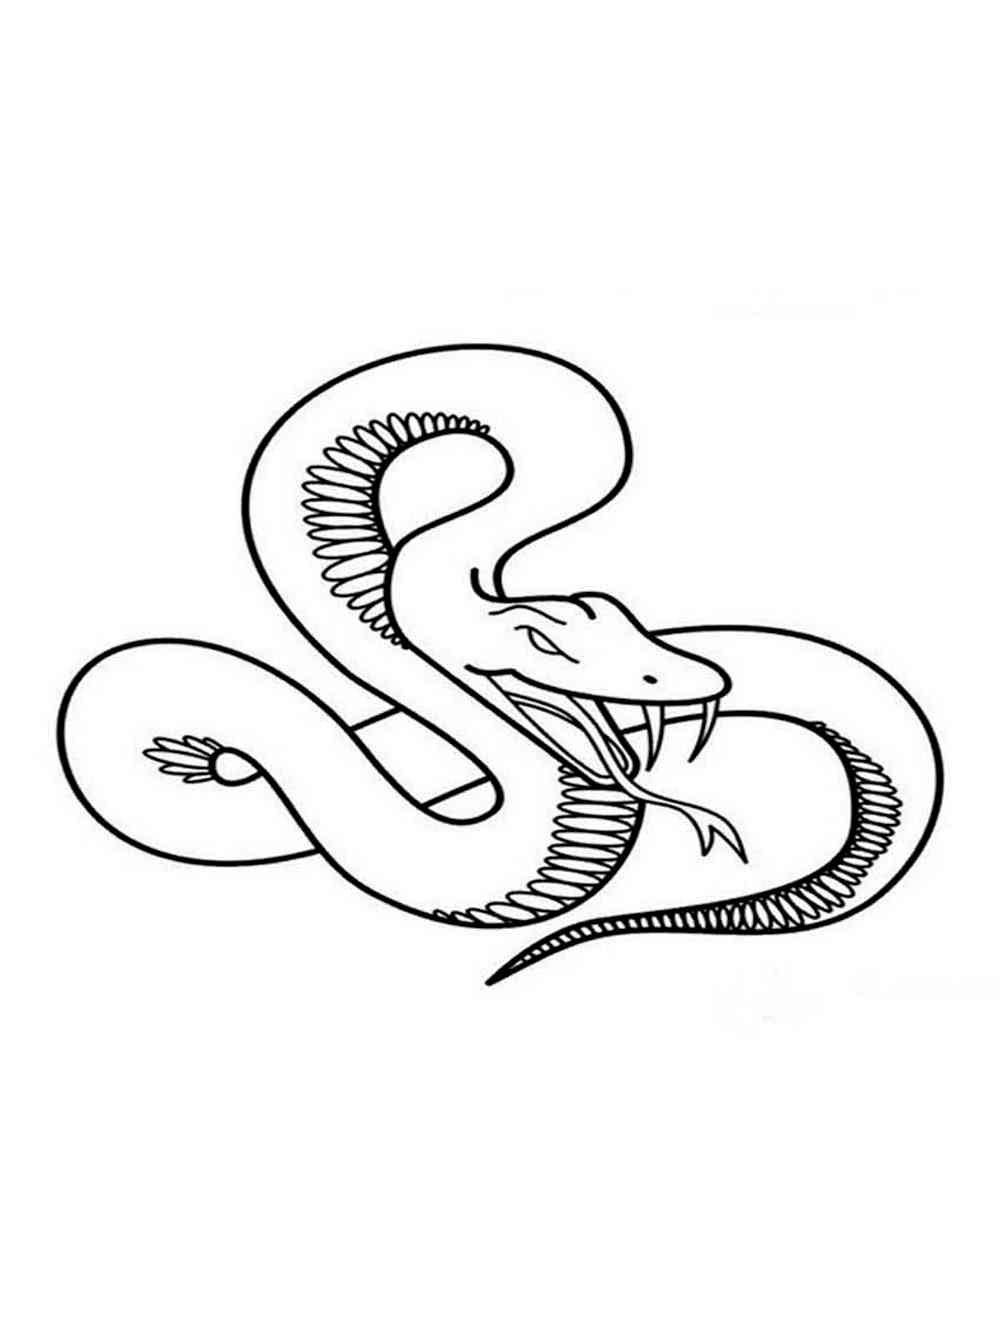 Simple Snake coloring page